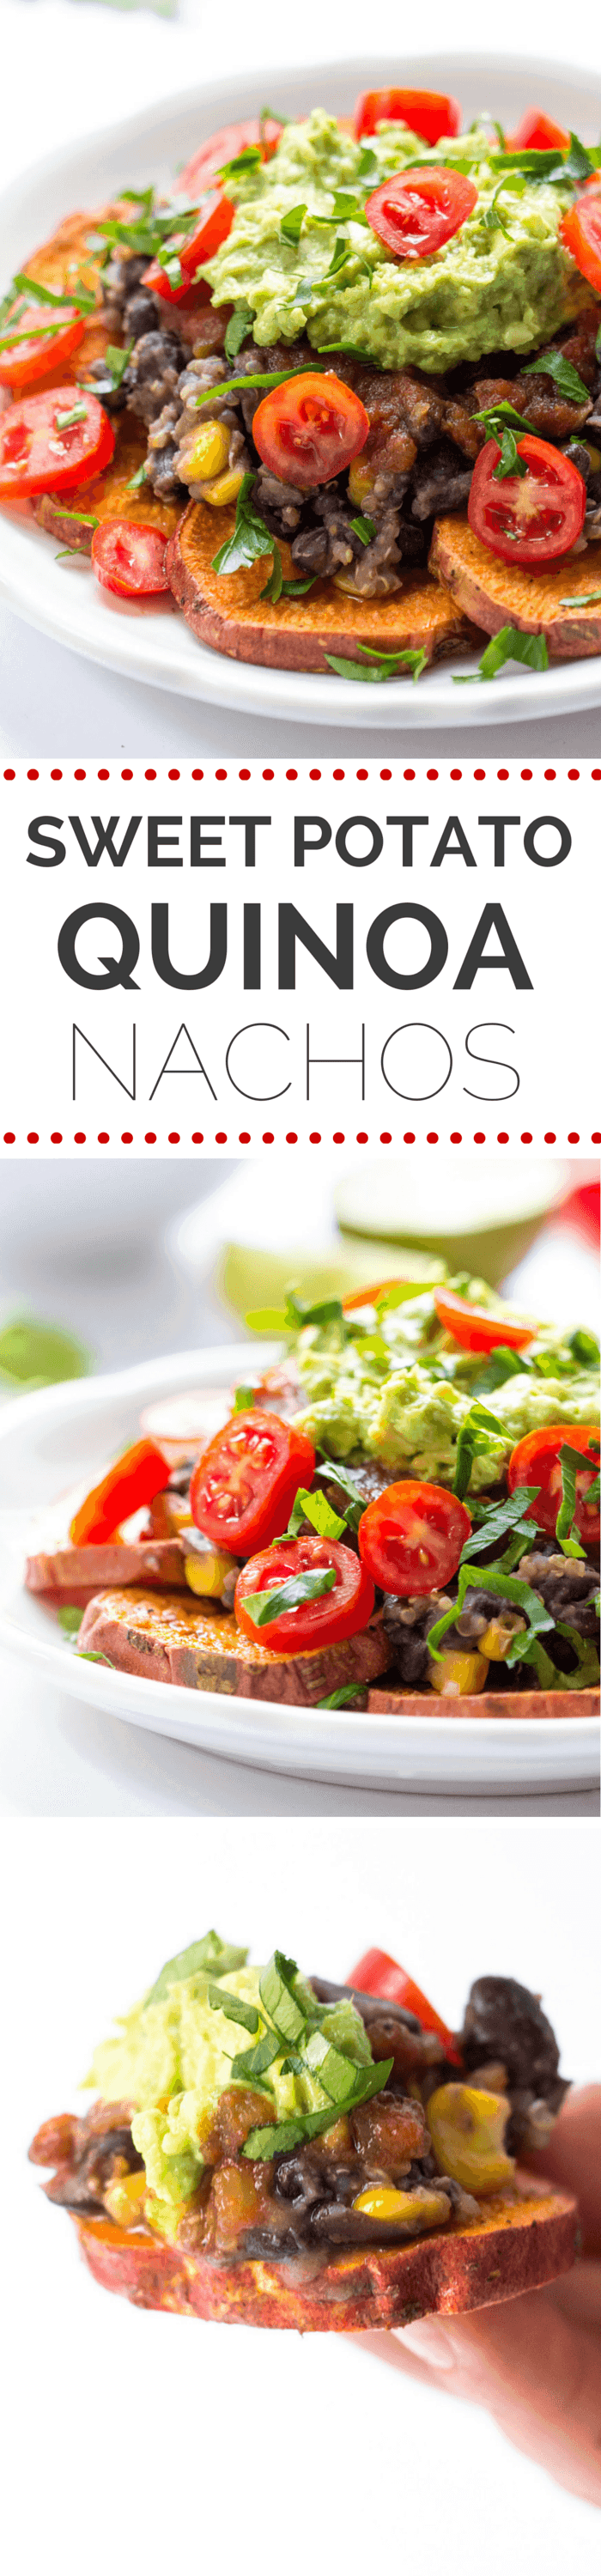 How to make the BEST DAMN vegan nachos on the planet!! Use sweet potatoes instead of corn chips, skip the meat and add black beans + quinoa, then top it all off with salsa, guac and cilantro. PERFECTION!